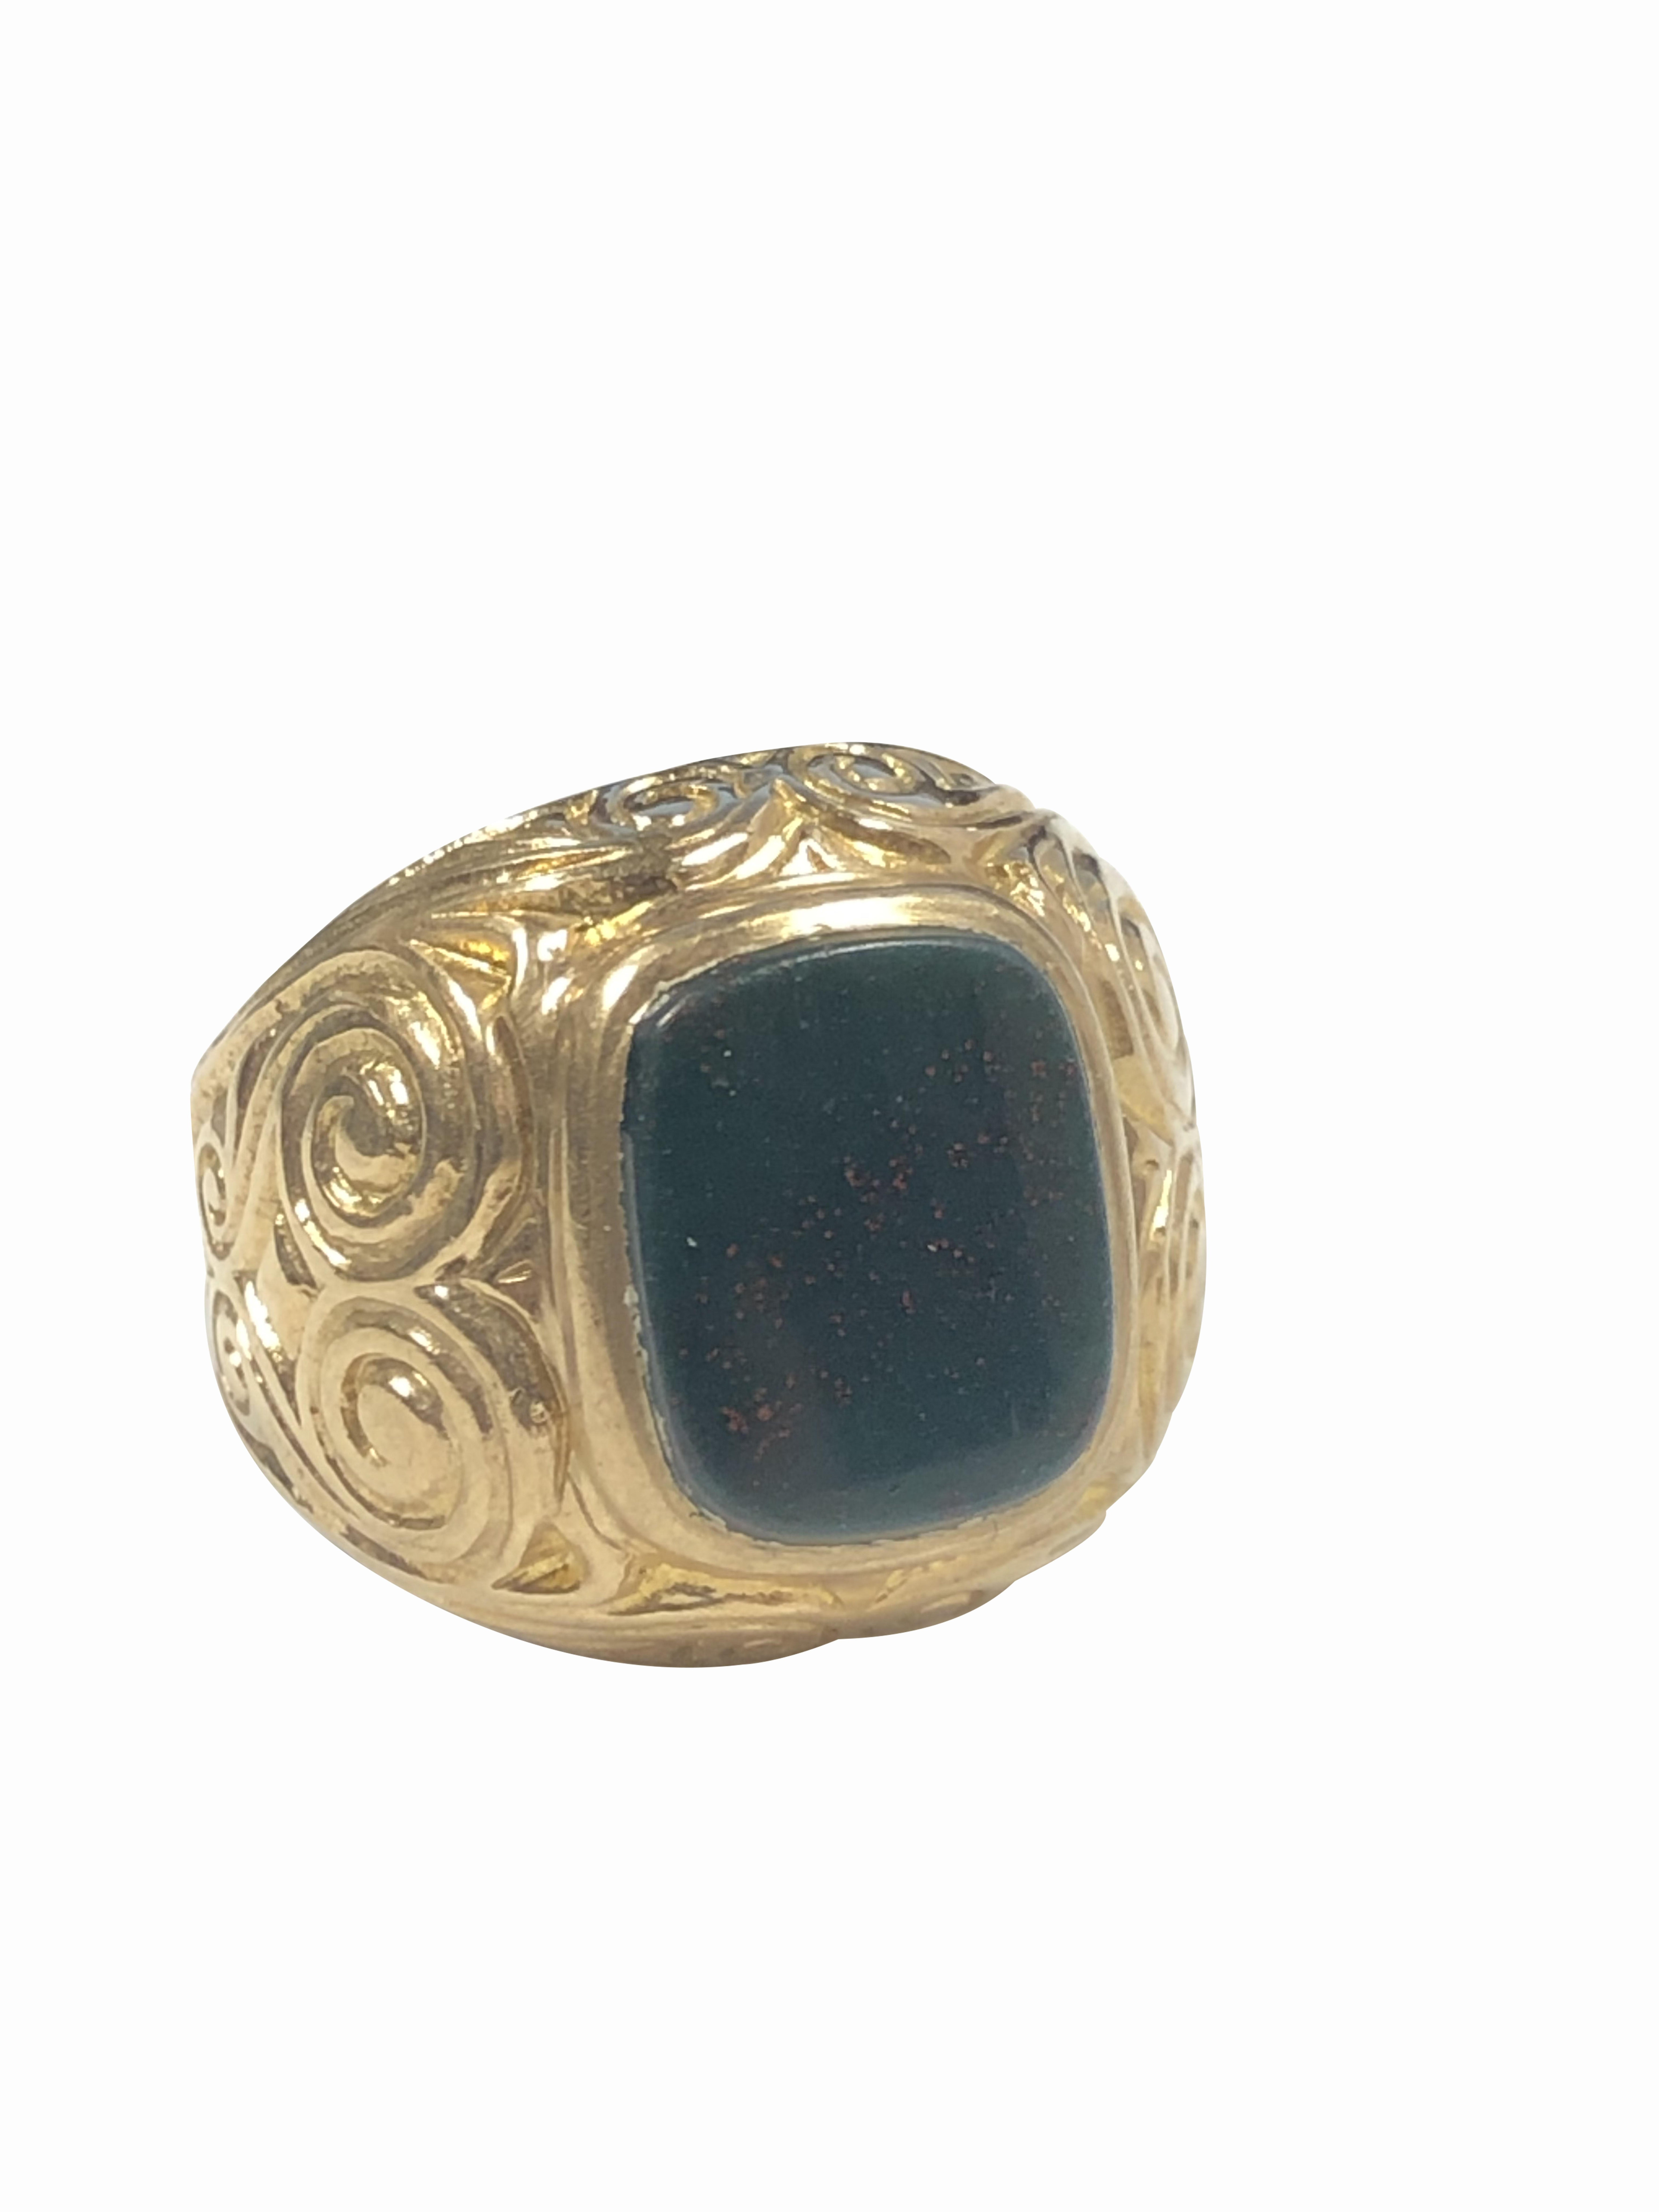 Circa 1910 Yellow Gold Signet Ring, having a Heavily chased pattern and centrally set with a Blood stone Hard stone, the top of the ring measures 3/4 X 3/4 inch. The stone can be engraved with initials or Family Crest, overall excellent, seldom worn